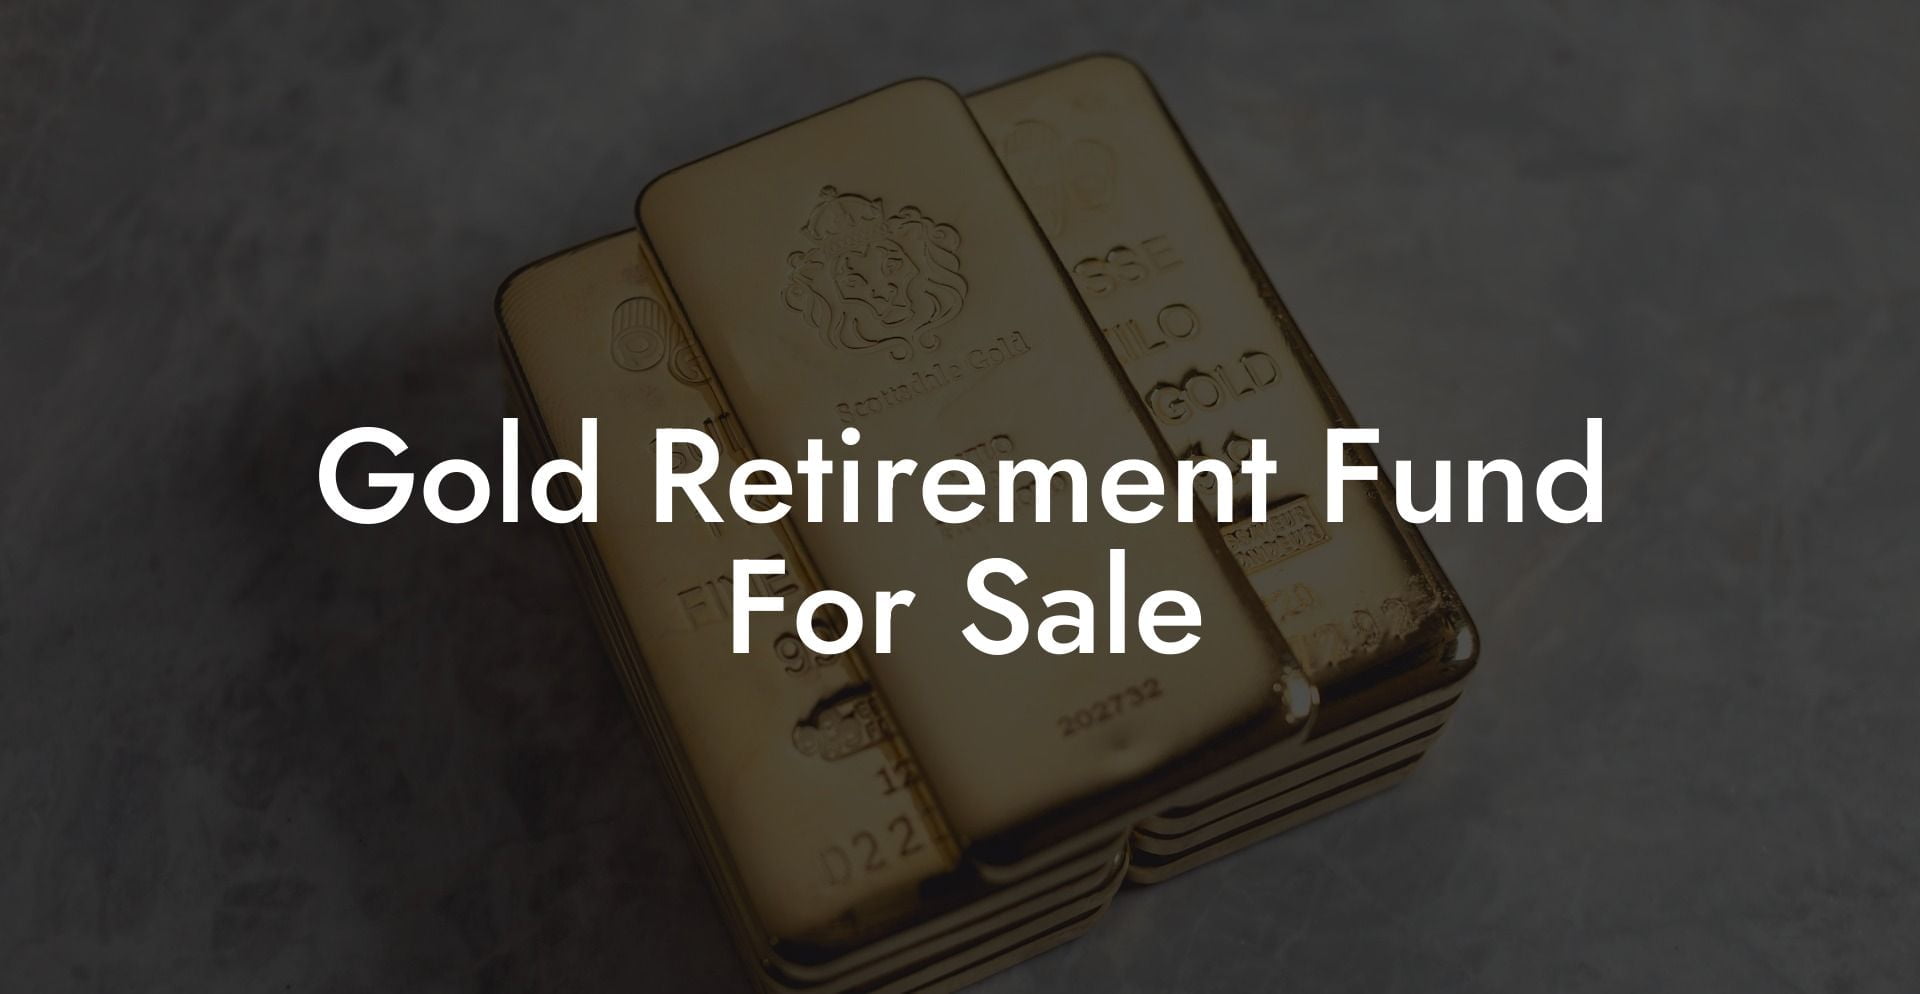 Gold Retirement Fund For Sale